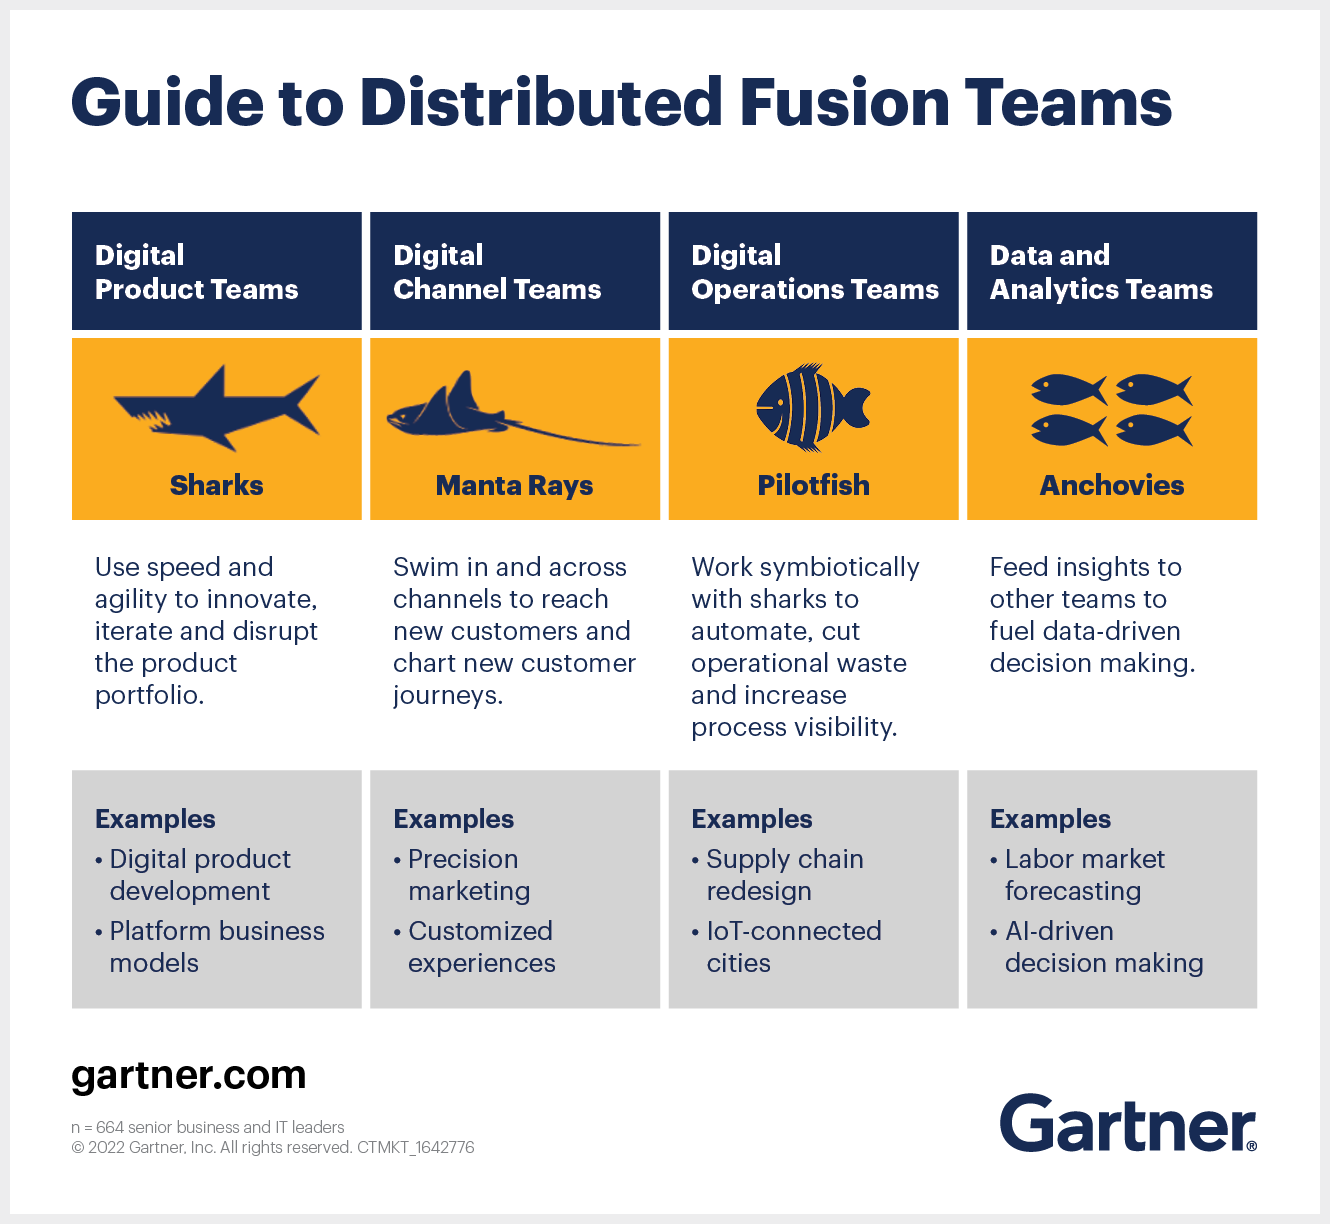 Guide to Distributed Fusion Teams